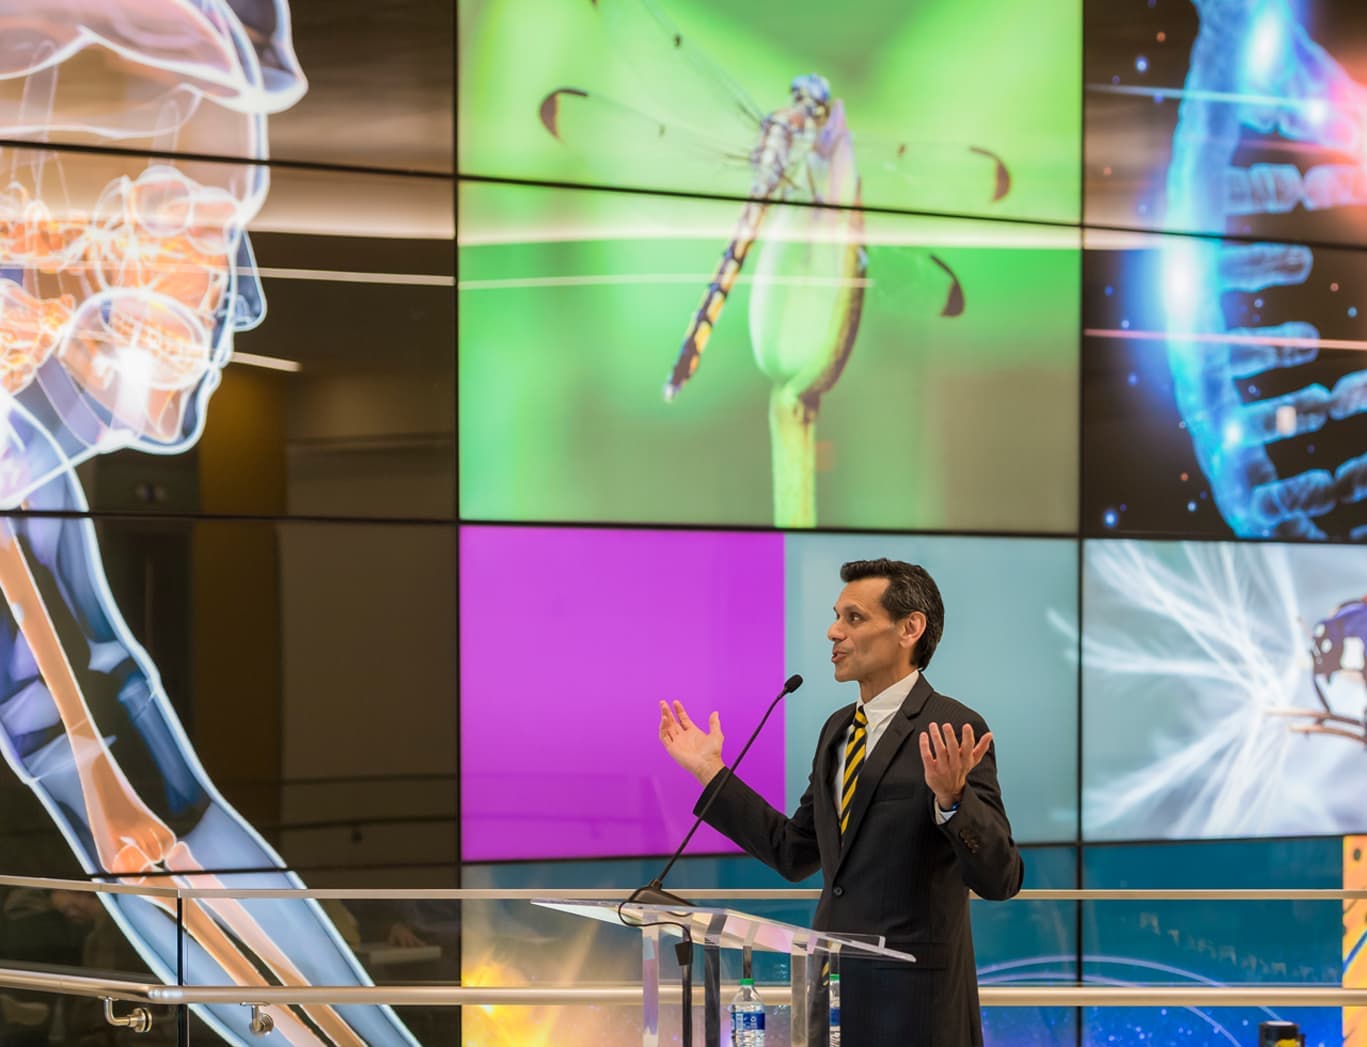 Michael Rao, president of VCU and VCU Health System, speaking at a podium in front of bright STEM-related graphics.